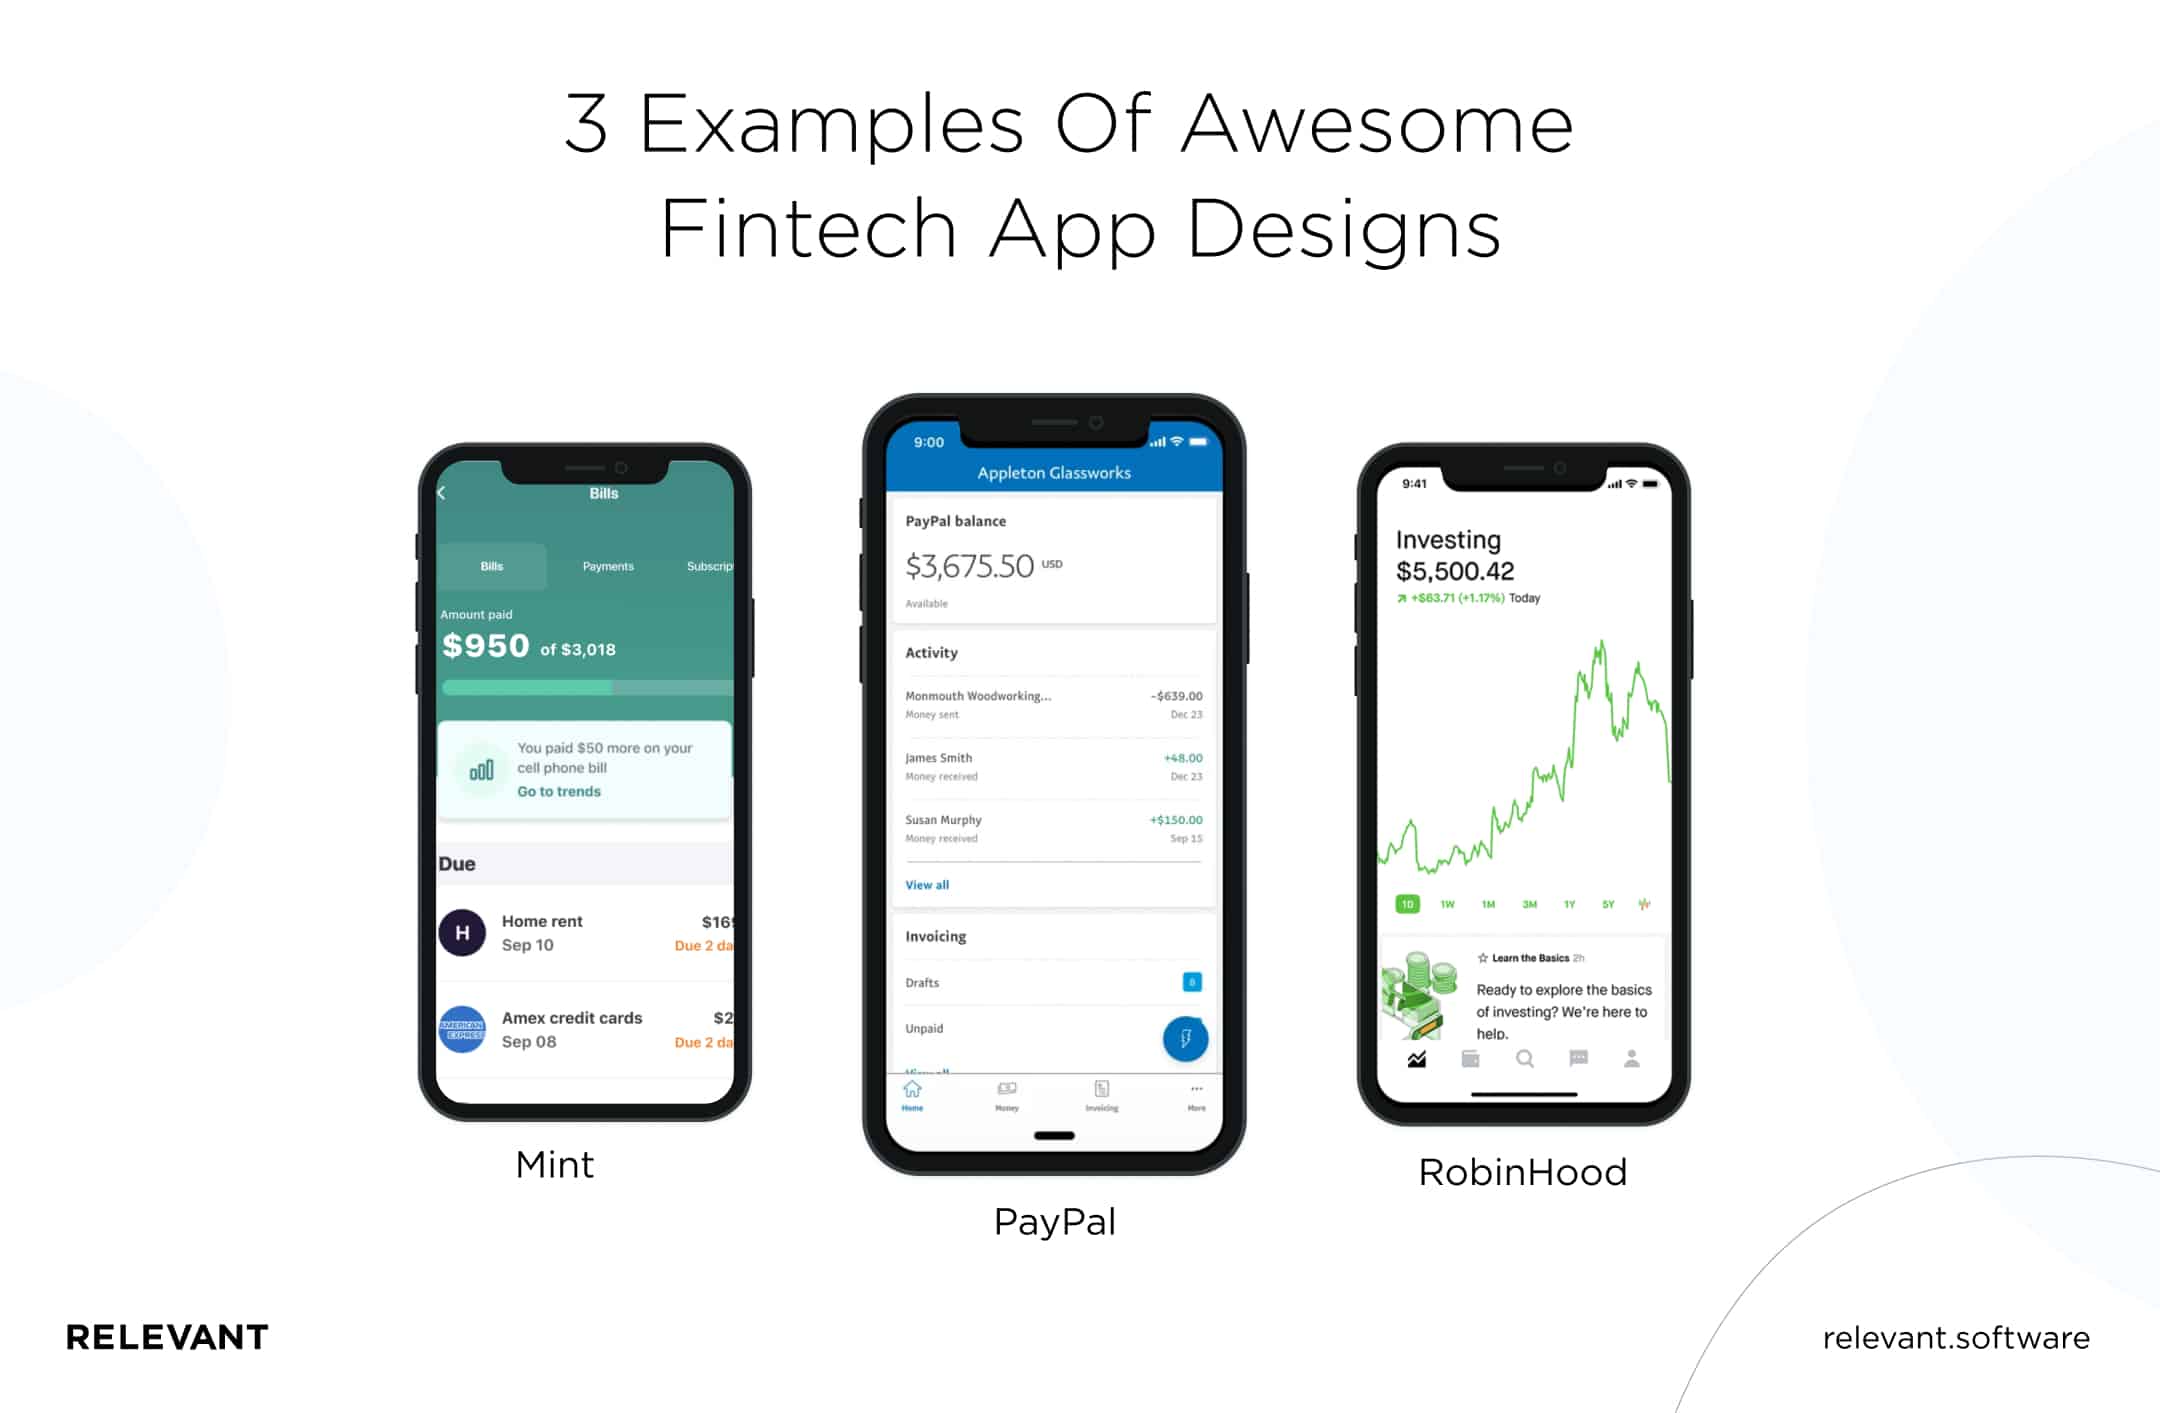 3 Examples Of Awesome Fintech App Designs